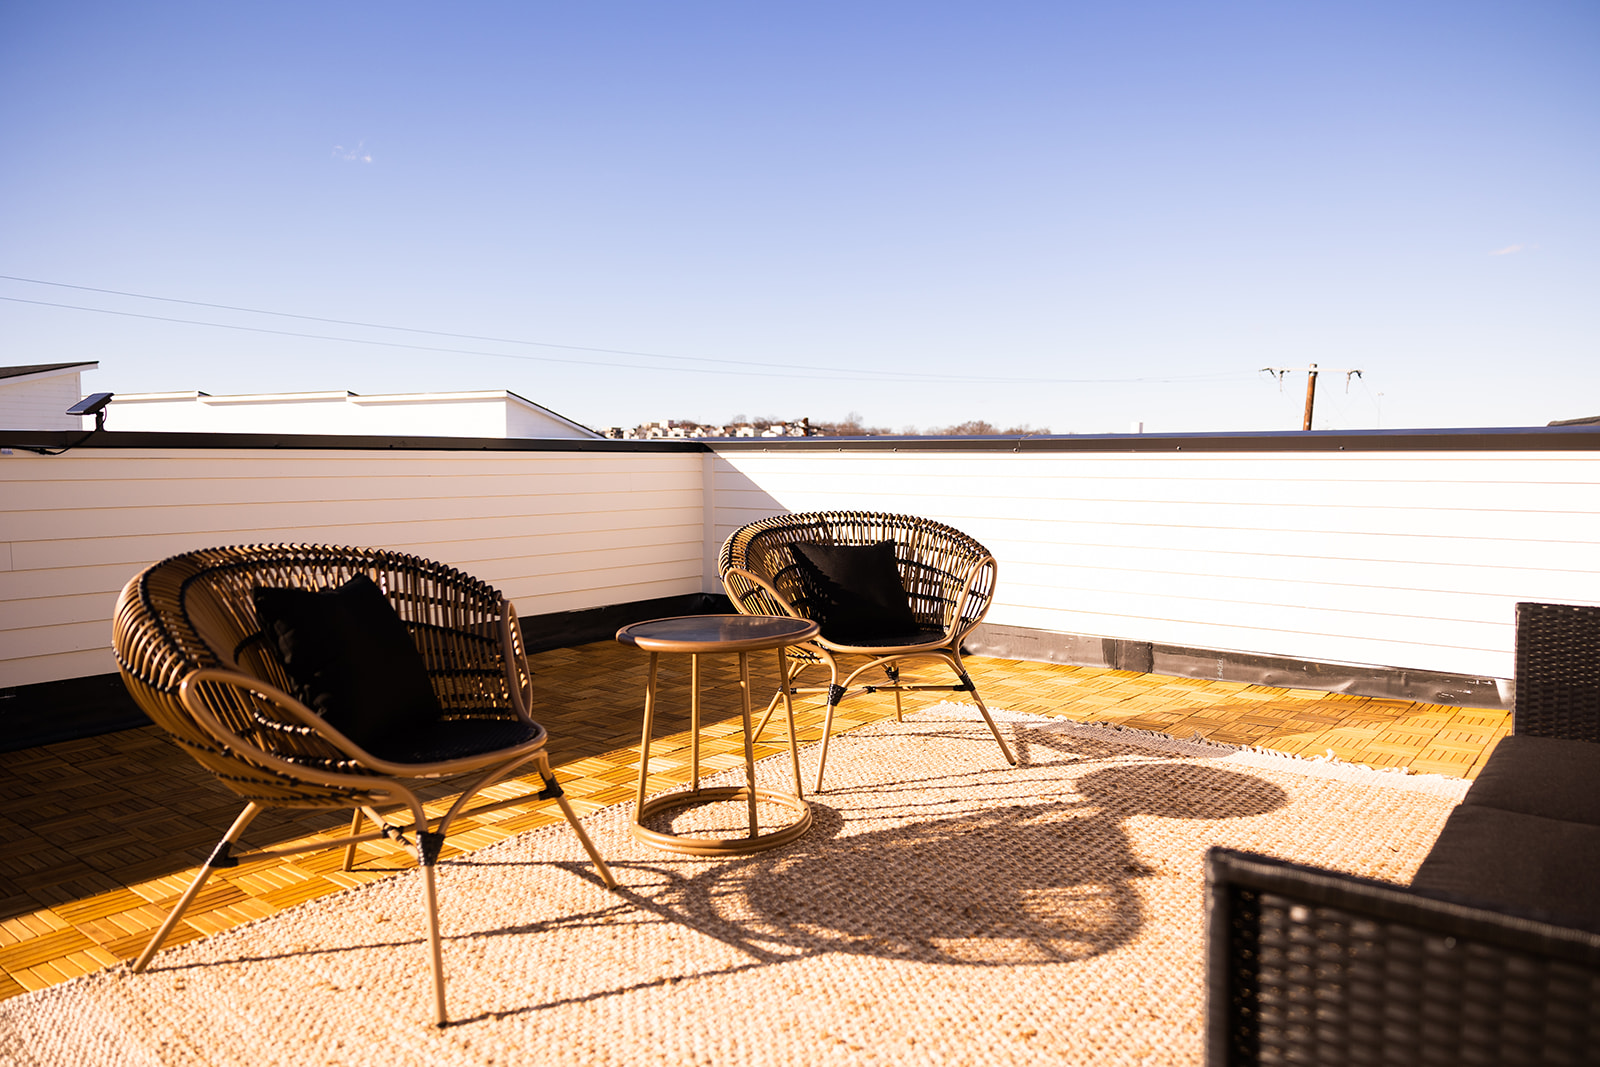 Unit 1: Rooftop Patio with Photo Mural and outdoor seating/dining. (4th Floor)